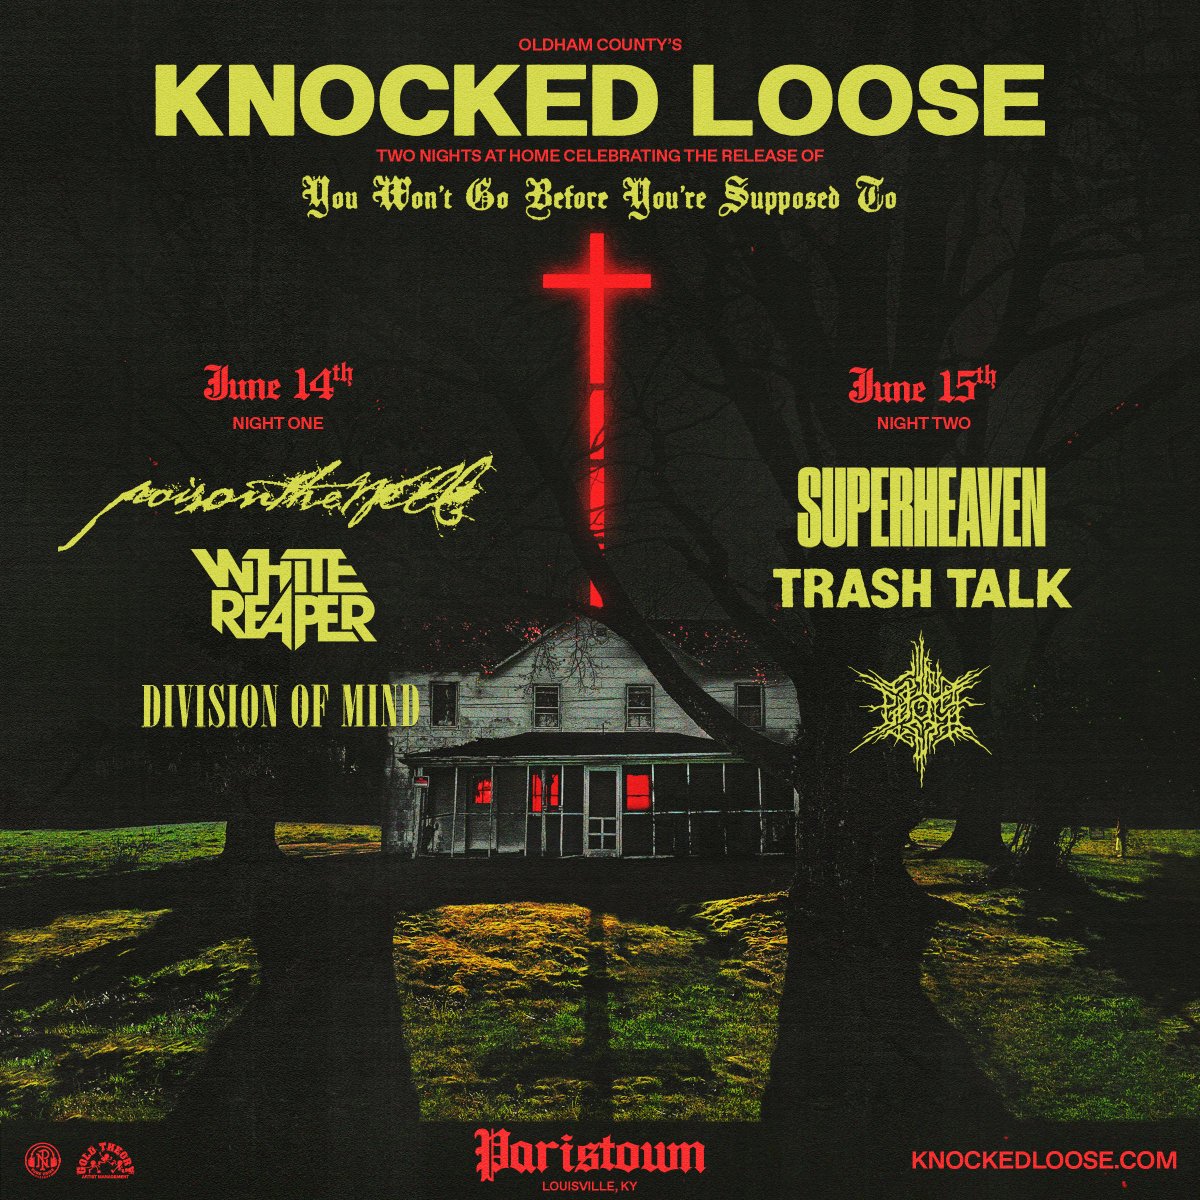 2⃣ nights of @knockedloose at @ParistownHall! On sale THIS FRIDAY! 6/14 ▪ @knockedloose ▪ @POISON_THE_WELL ▪ @WhiteReaperUSA ▪ Division of Mind 🎫: bit.ly/OFPHKnockedLoo… 6/15 ▪ @knockedloose ▪ @superheavenband ▪ @TRASH_TALK ▪ @psychoframedc 🎫: bit.ly/OFPHKnockedLoo…